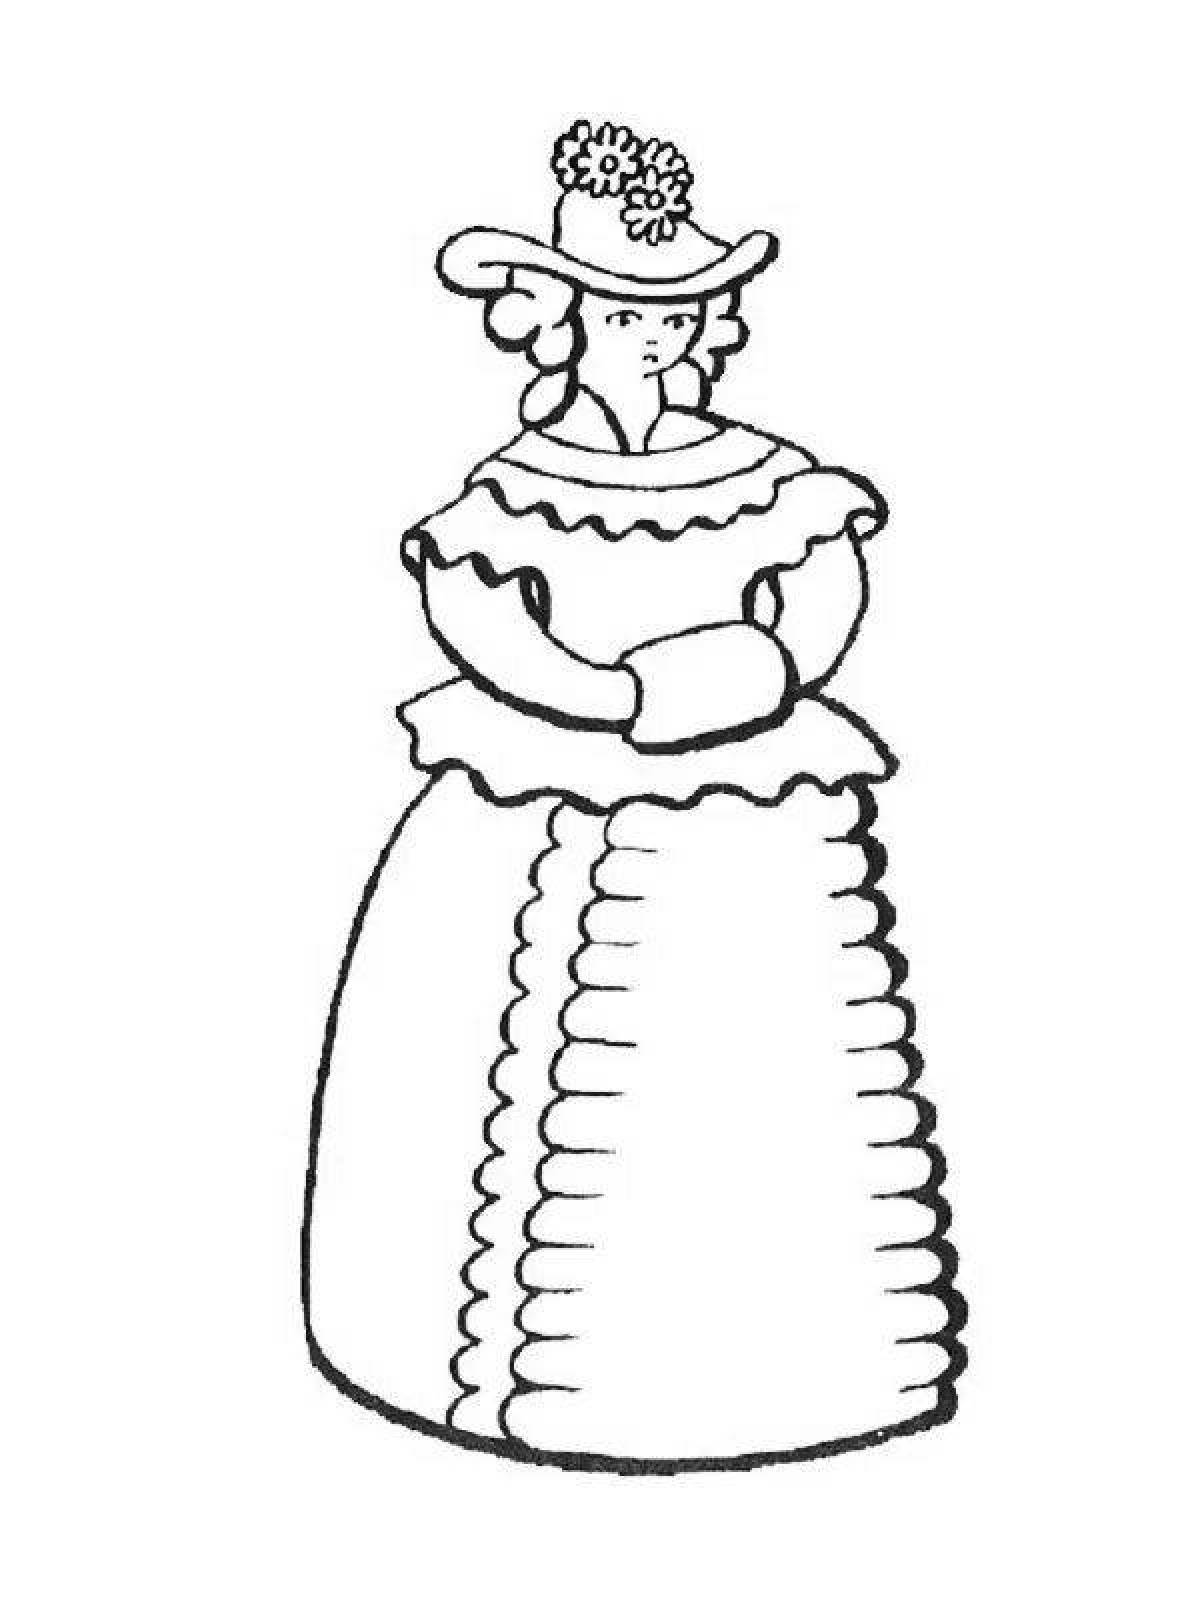 Coloring page playful dymkovo lady for kids